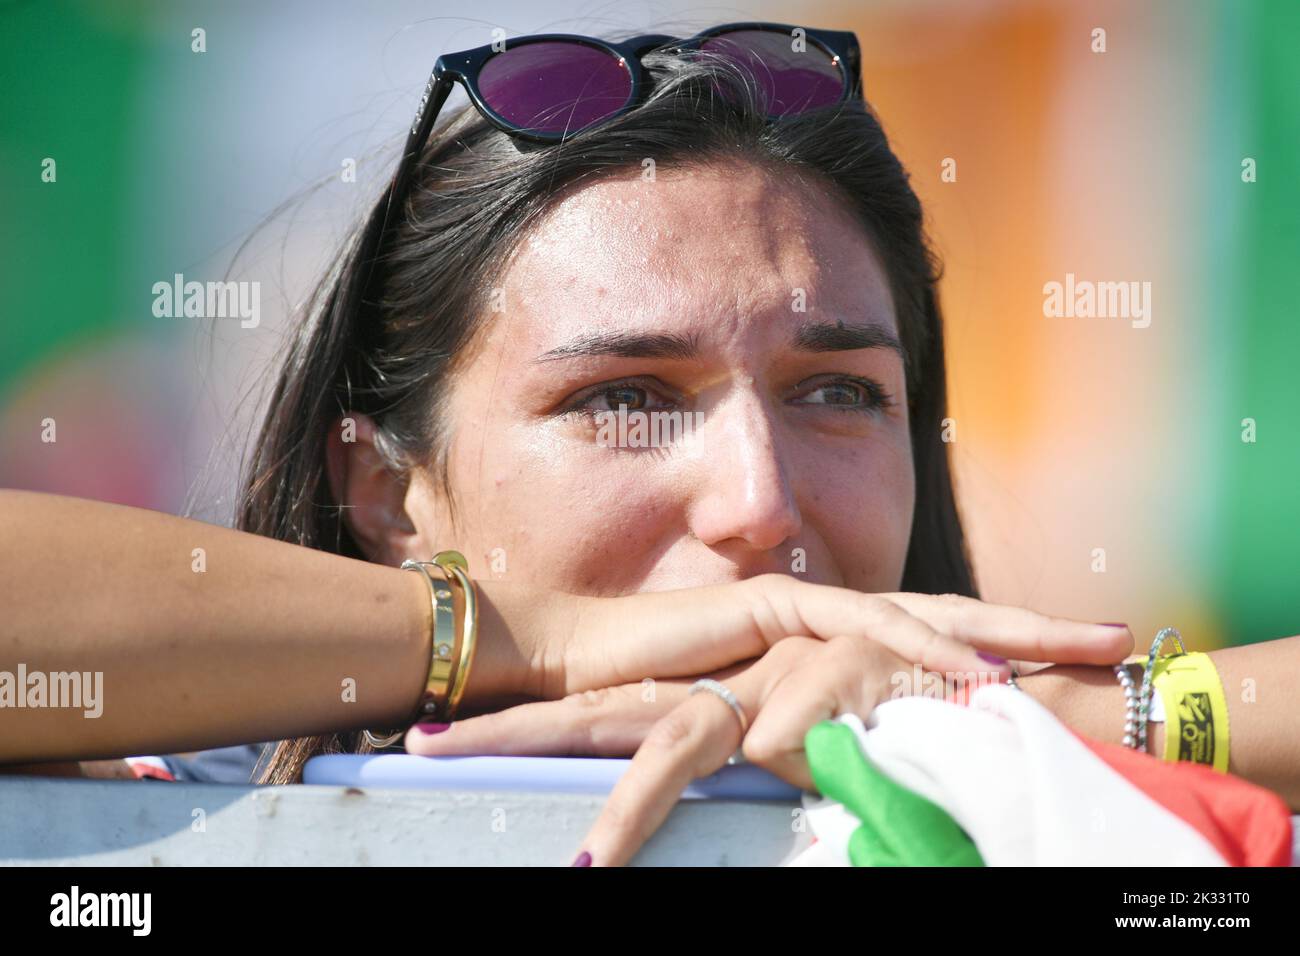 Racice, Czech Republic. 24th Sep, 2022. Italian fan during Day 7 of the 2022 World Rowing Championships at the Labe Arena Racice on September 24, 2022 in Racice, Czech Republic. Credit: Jan Stastny/CTK Photo/Alamy Live News Stock Photo